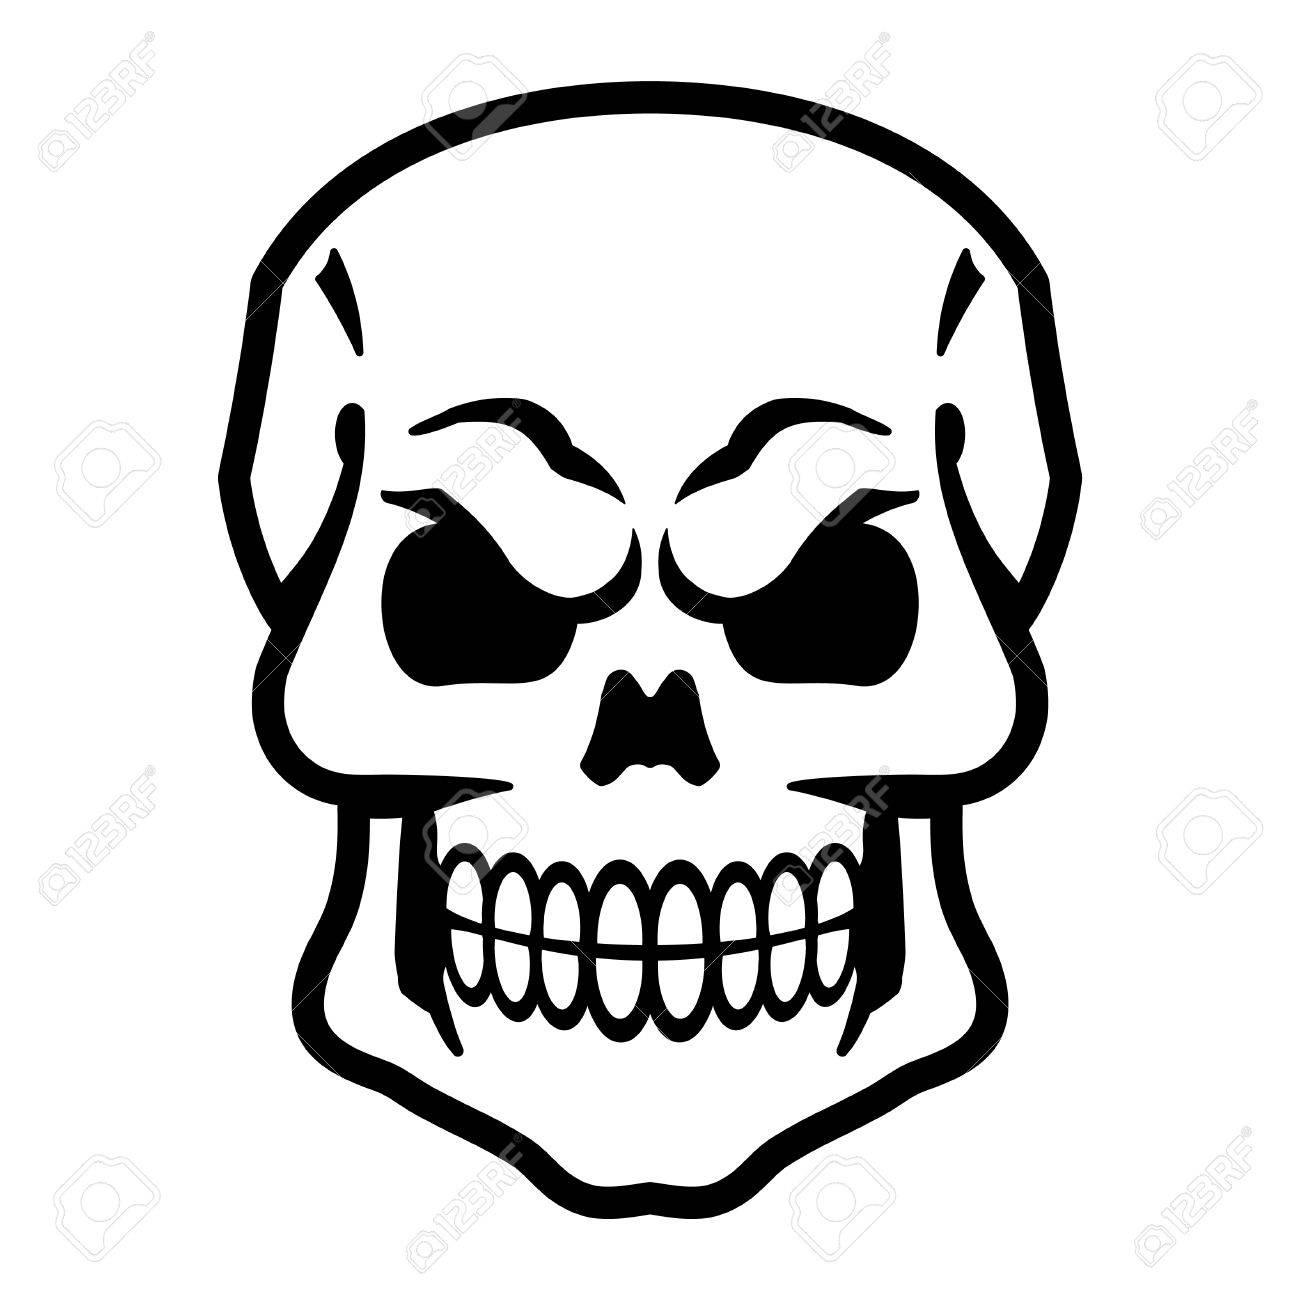 Download Free png Skull Vector Icon Royalty Free Cliparts